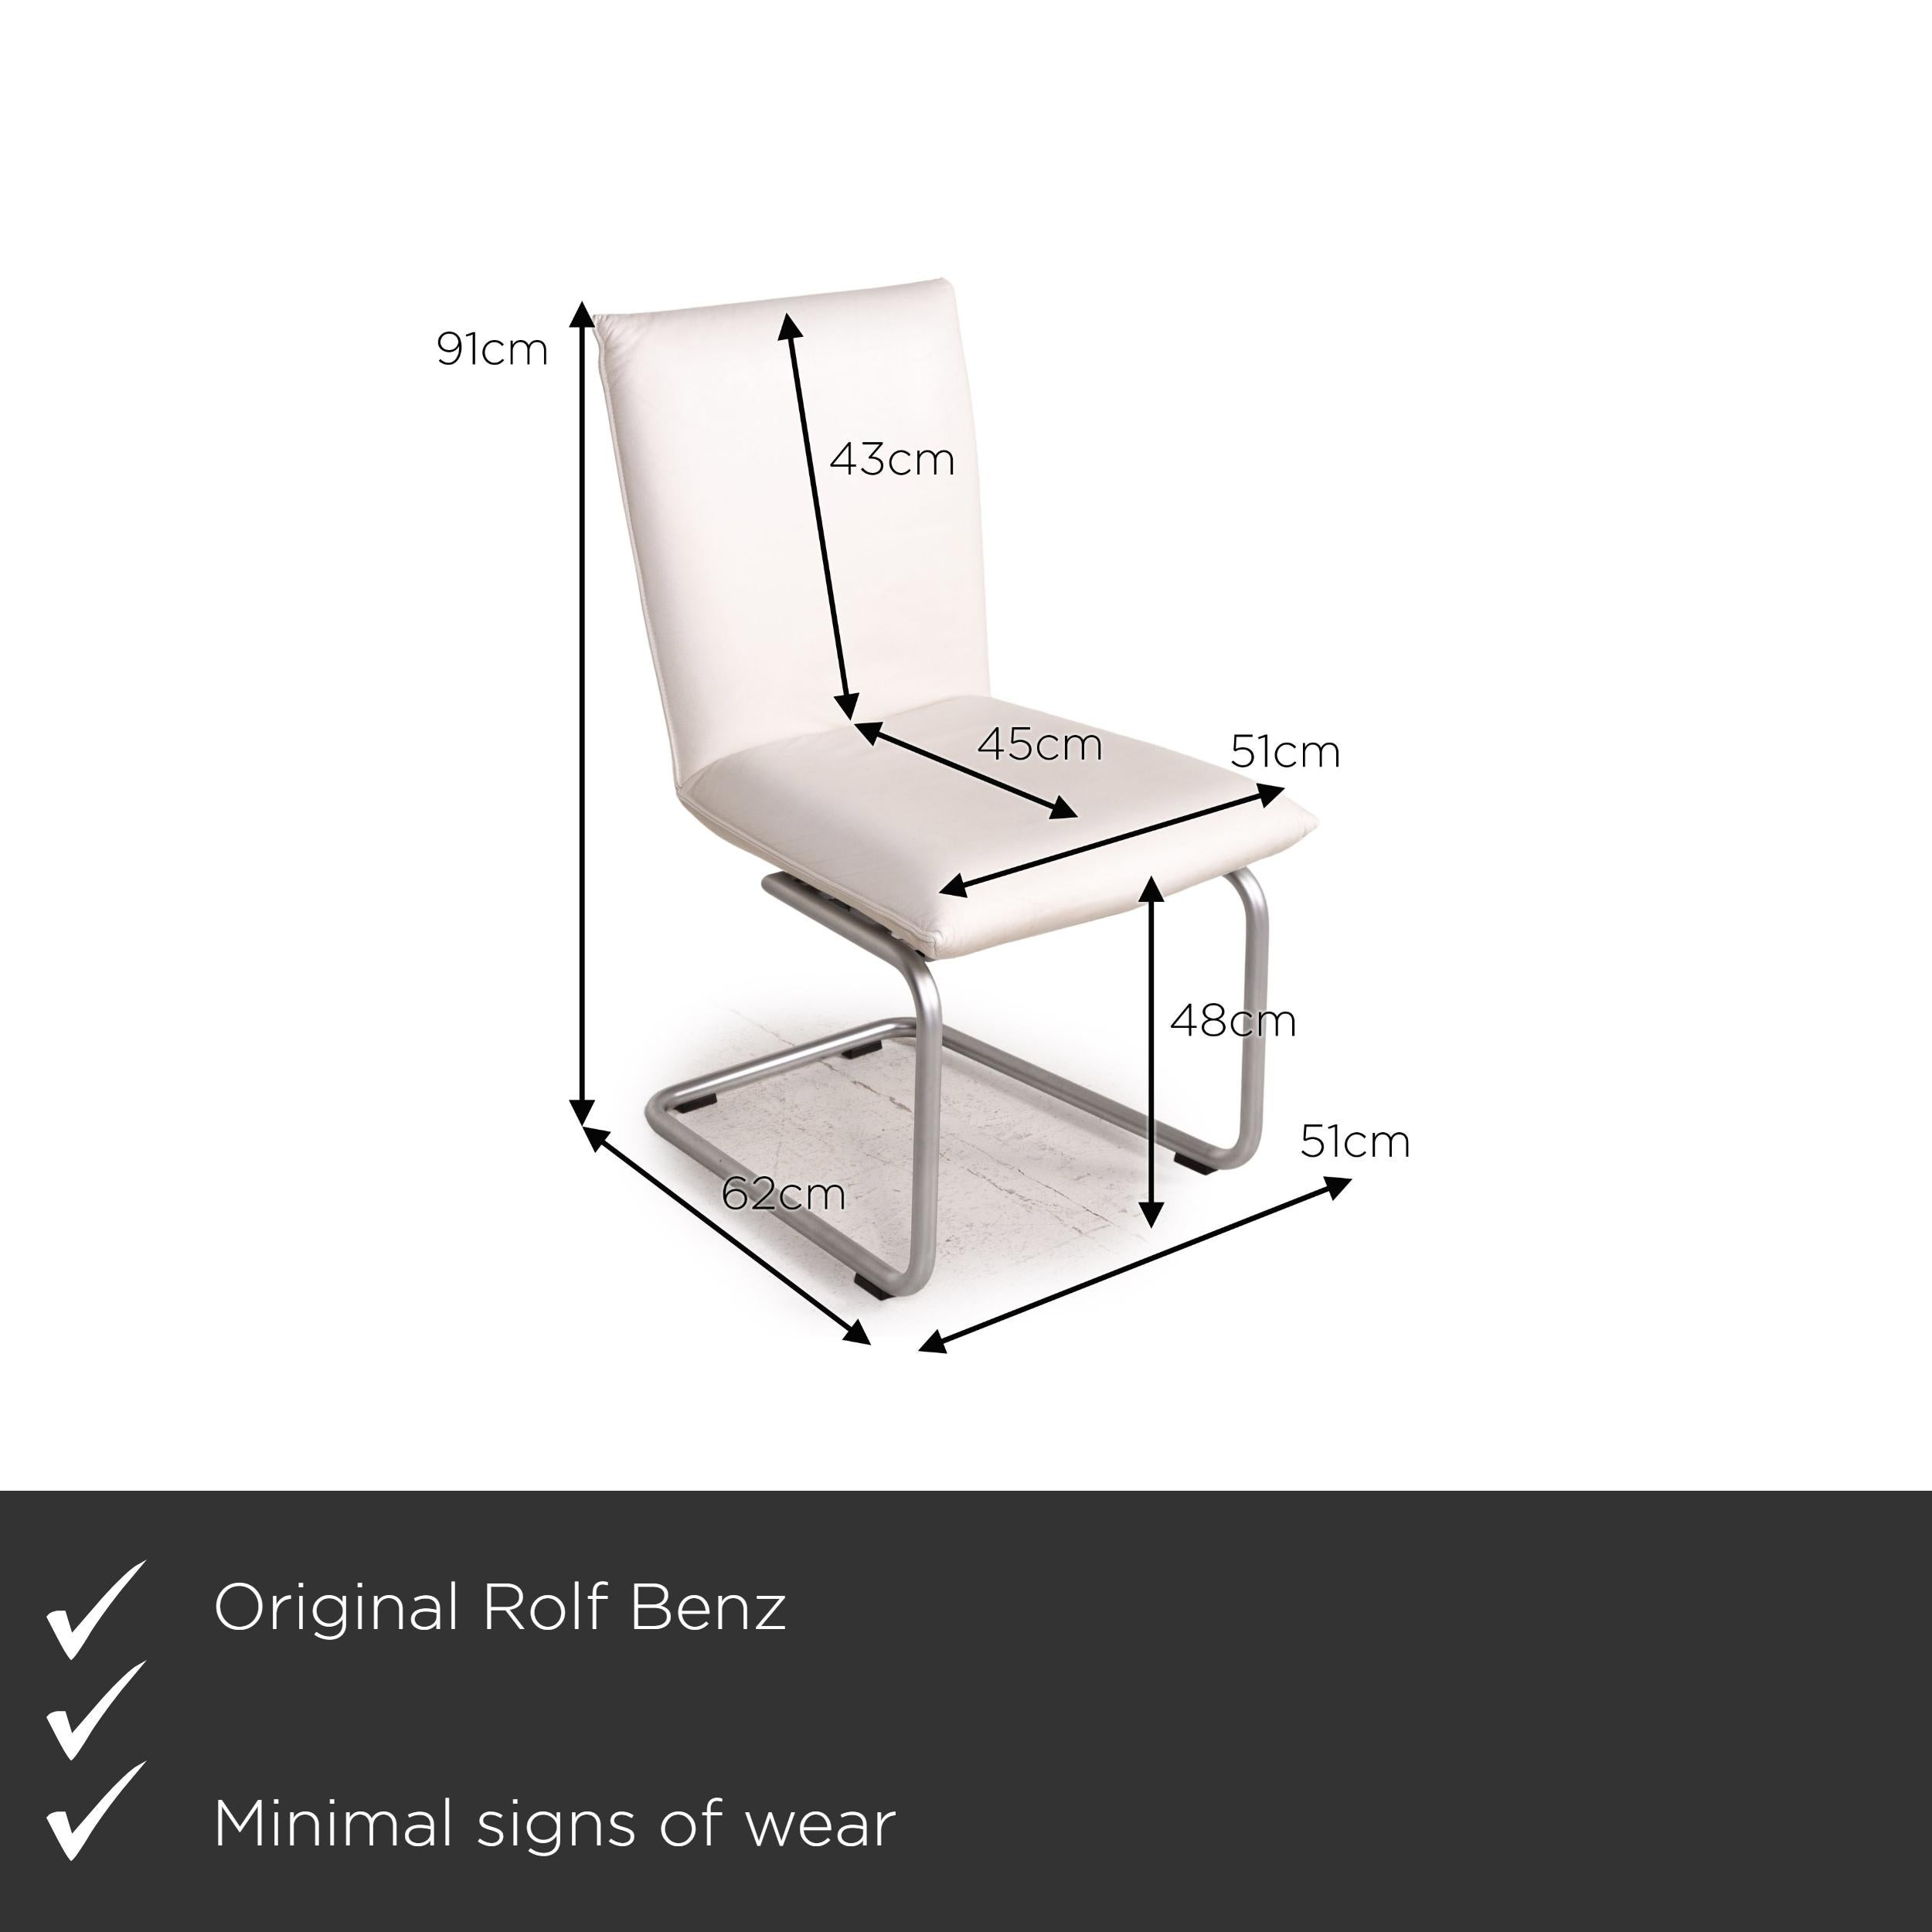 We present to you a Rolf Benz 620 leather chair cream cantilever.


 Product measurements in centimeters:
 

Depth: 62
Width: 51
Height: 91
Seat height: 48
Rest height:
Seat depth: 45
Seat width: 51
Back height: 43.

 